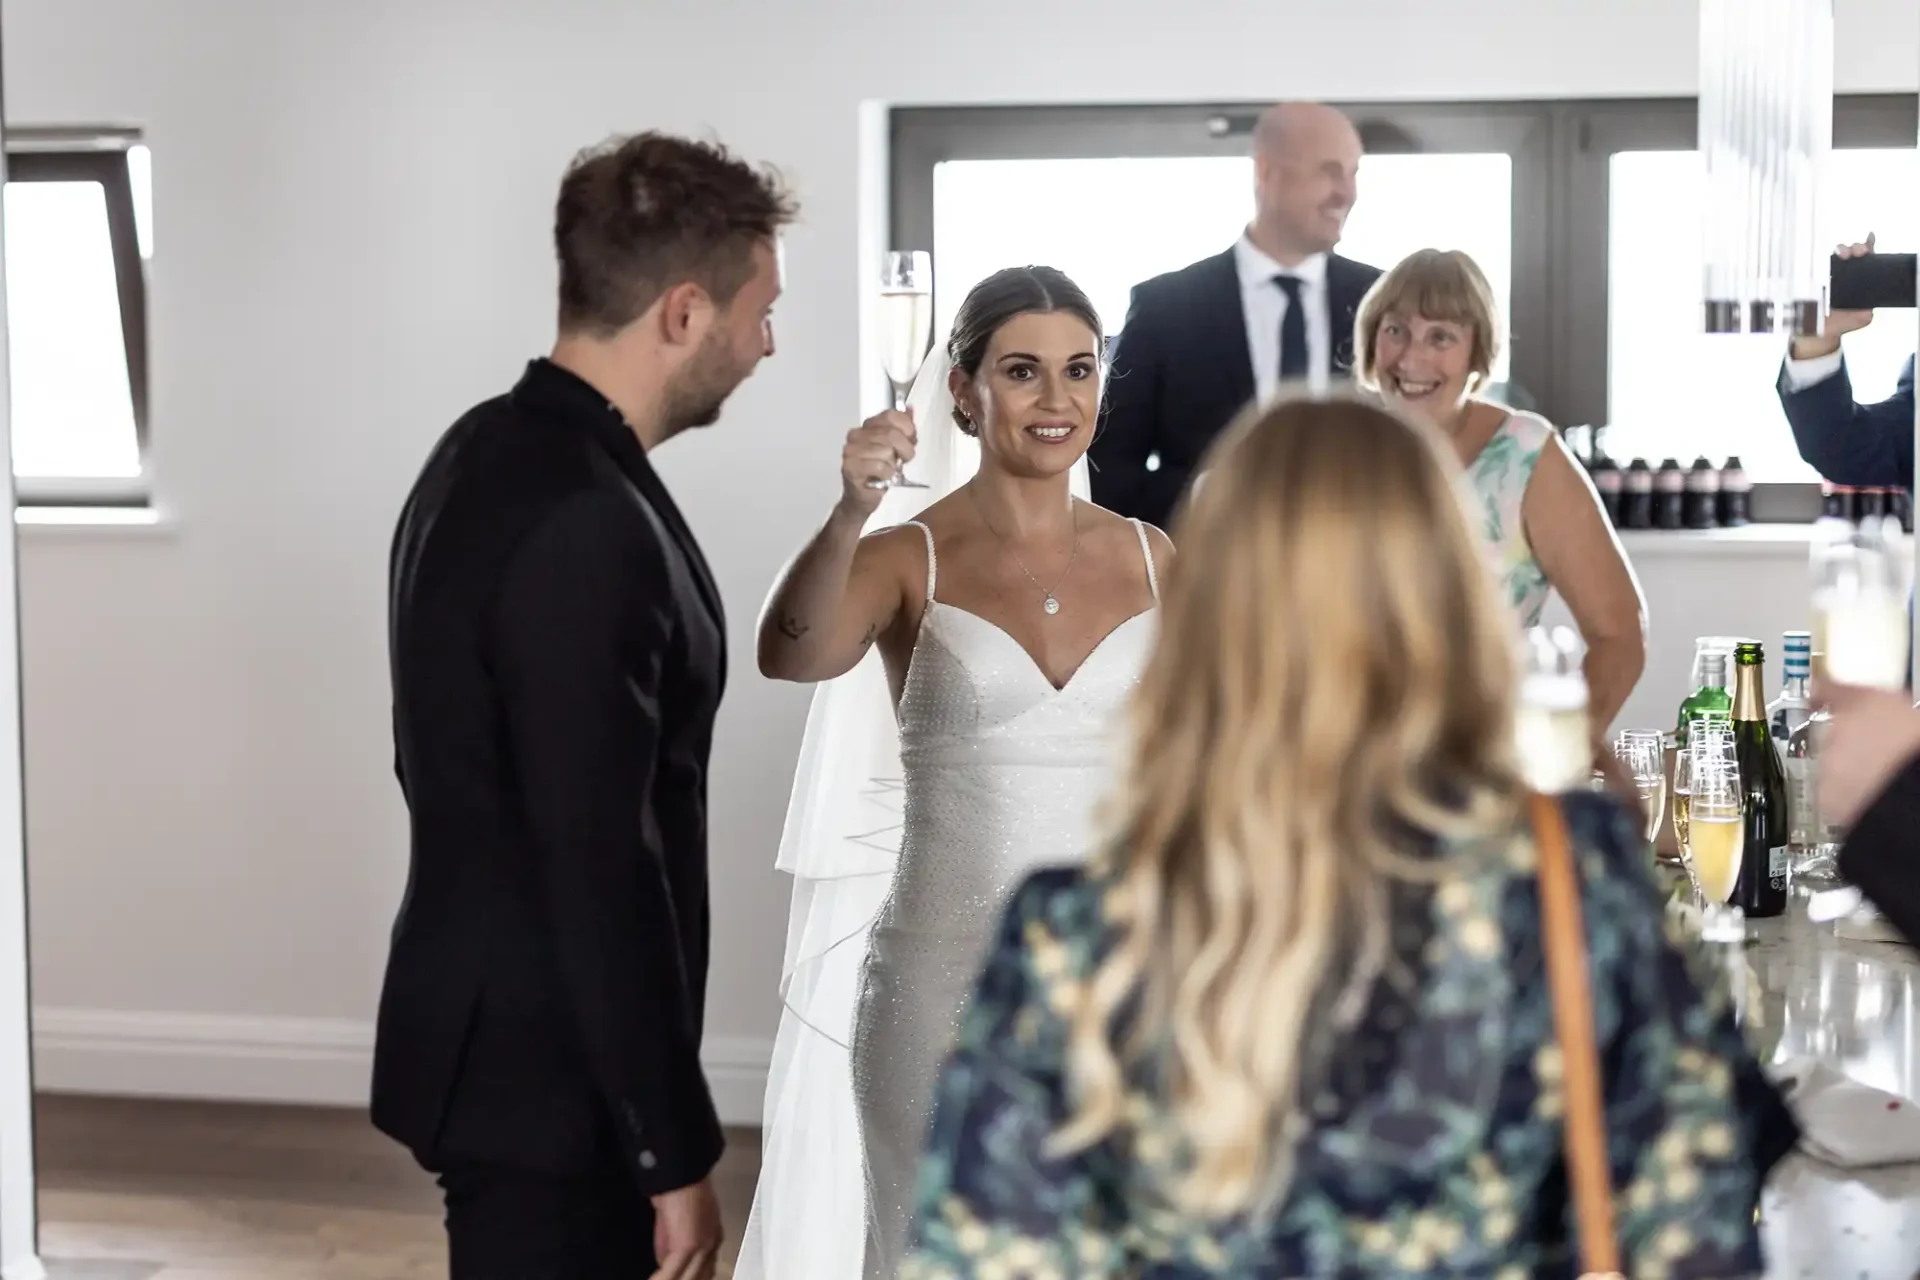 A bride holding a champagne glass greets a guest at a reception, with a smiling groom and other guests nearby in an elegant room.